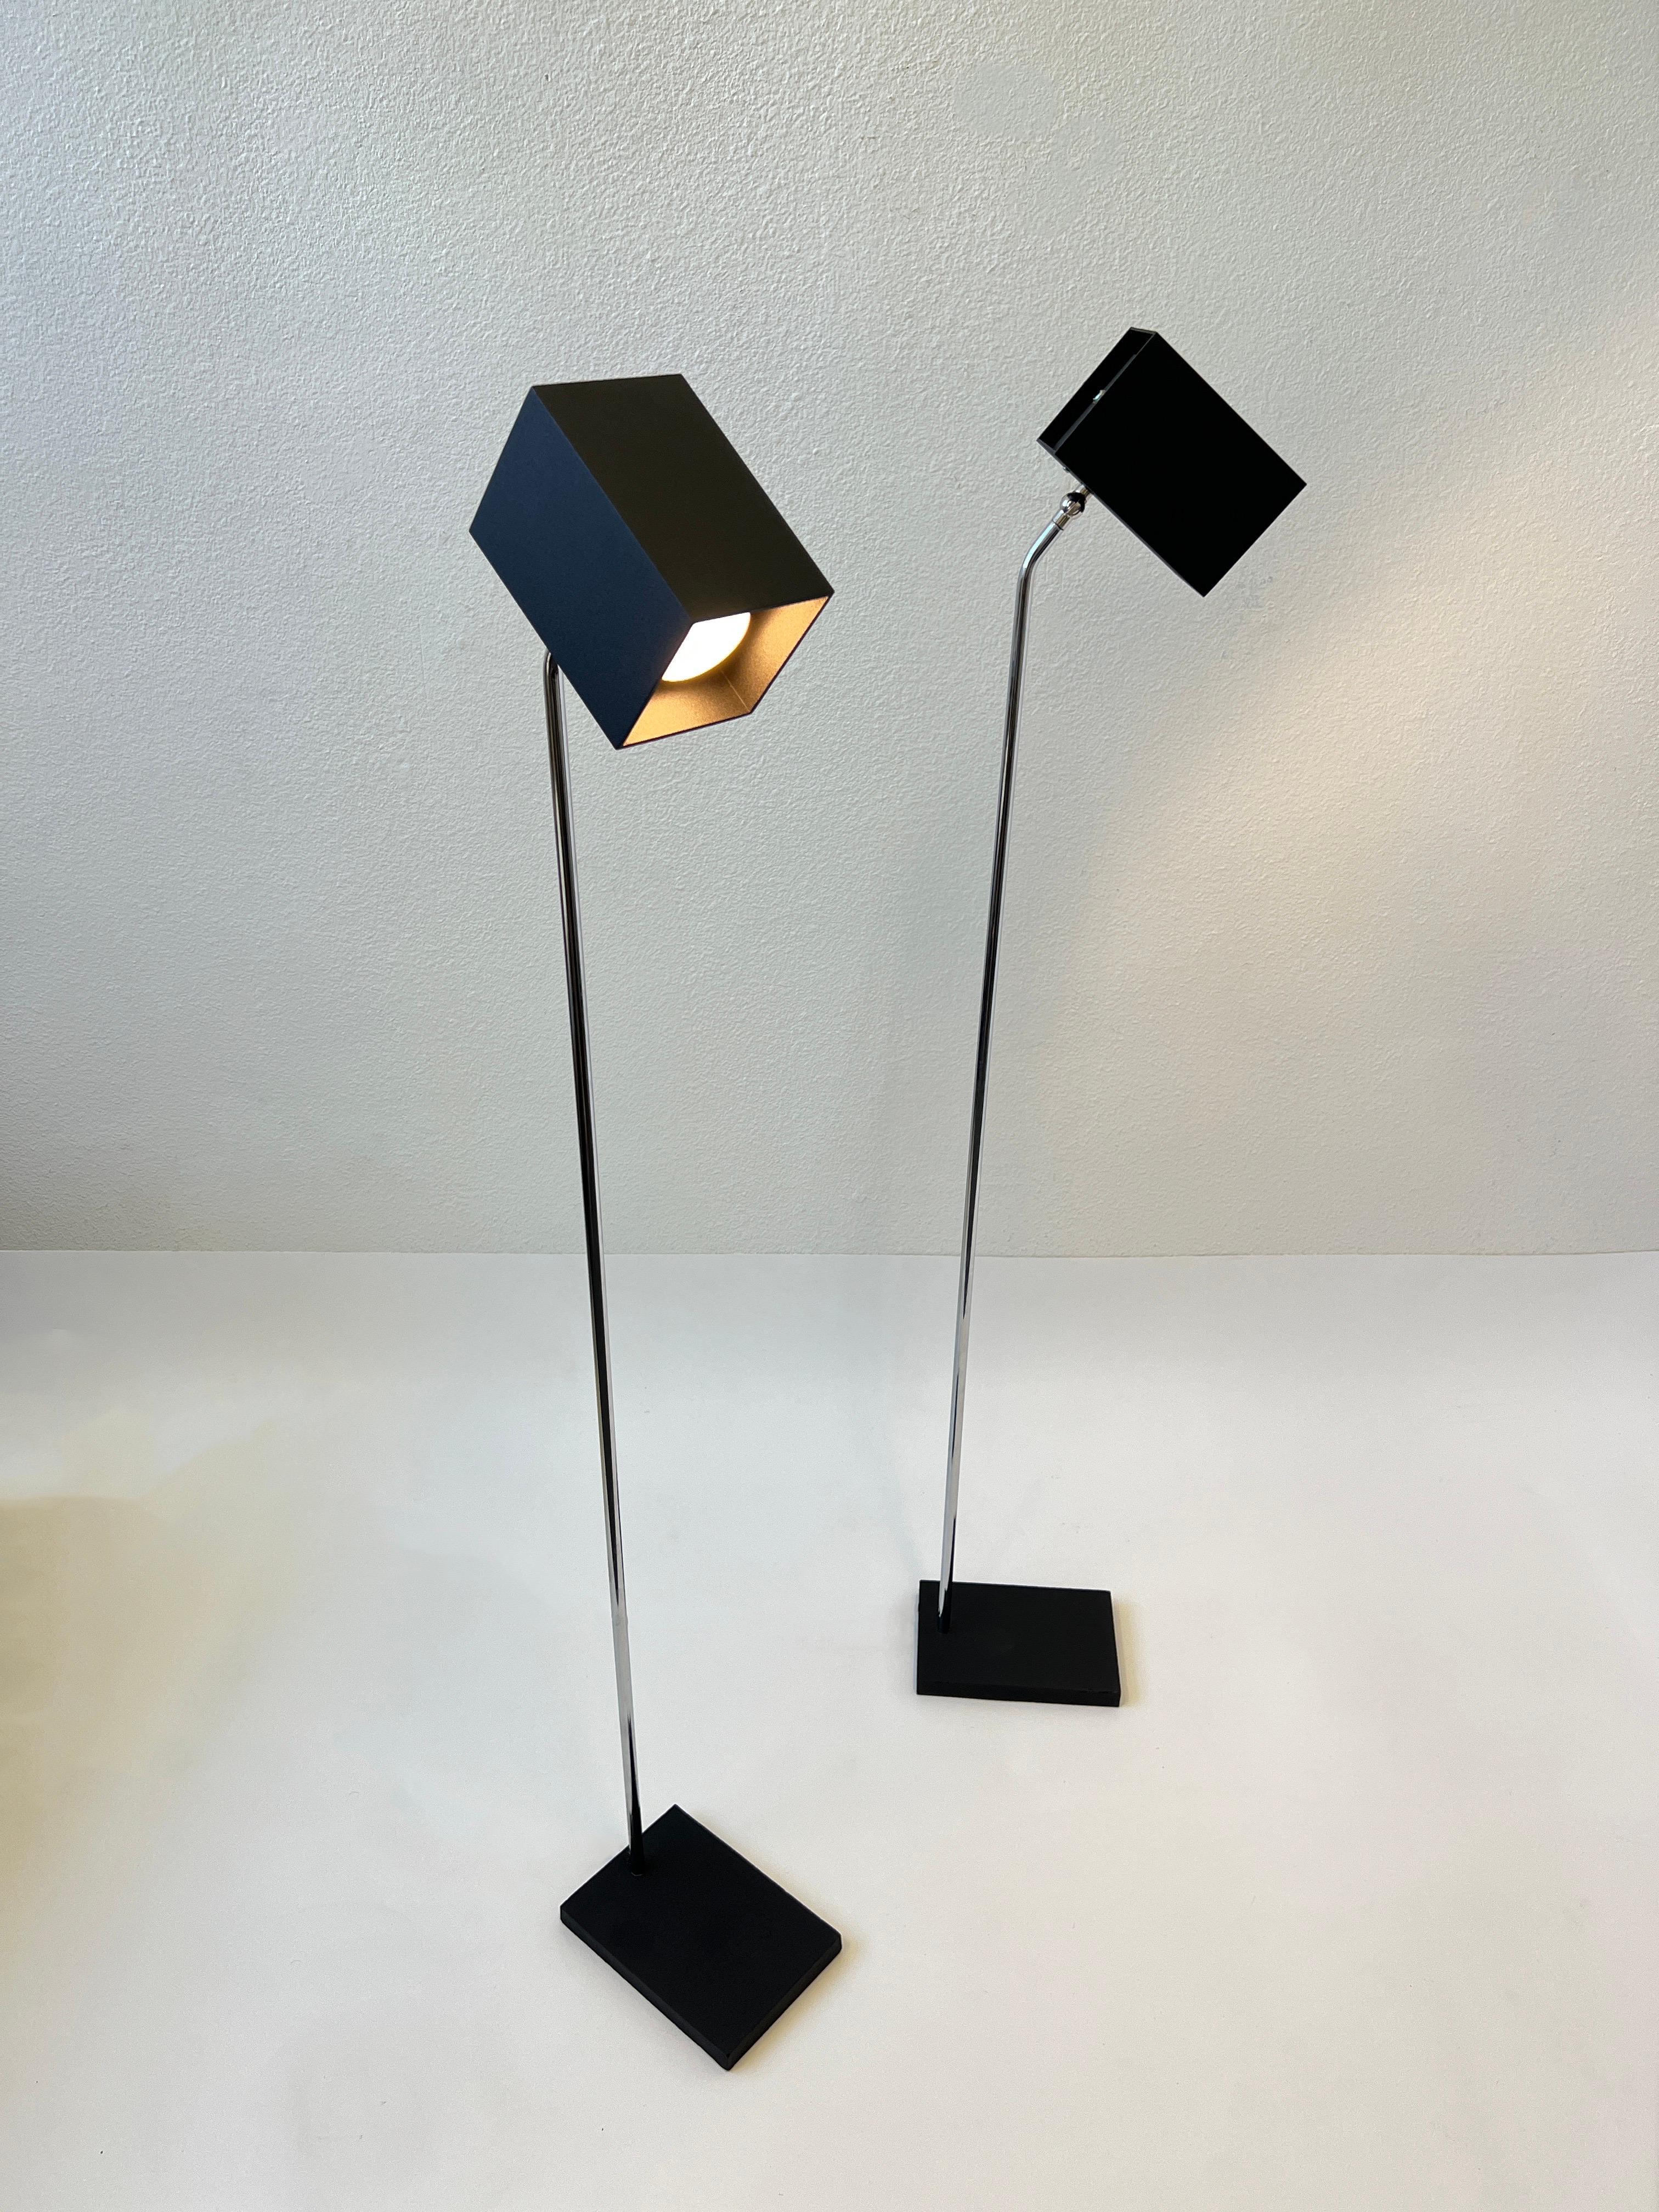 1960s pair of polish chrome and black textured powder coated reading floor lamps design by Robert Sonneman for Kovacs. Newly rewired, On/Off rotating switch on shade.
It takes a regular 75w Max Edison lightbulb.
Measurements: 49” high 8” wide and